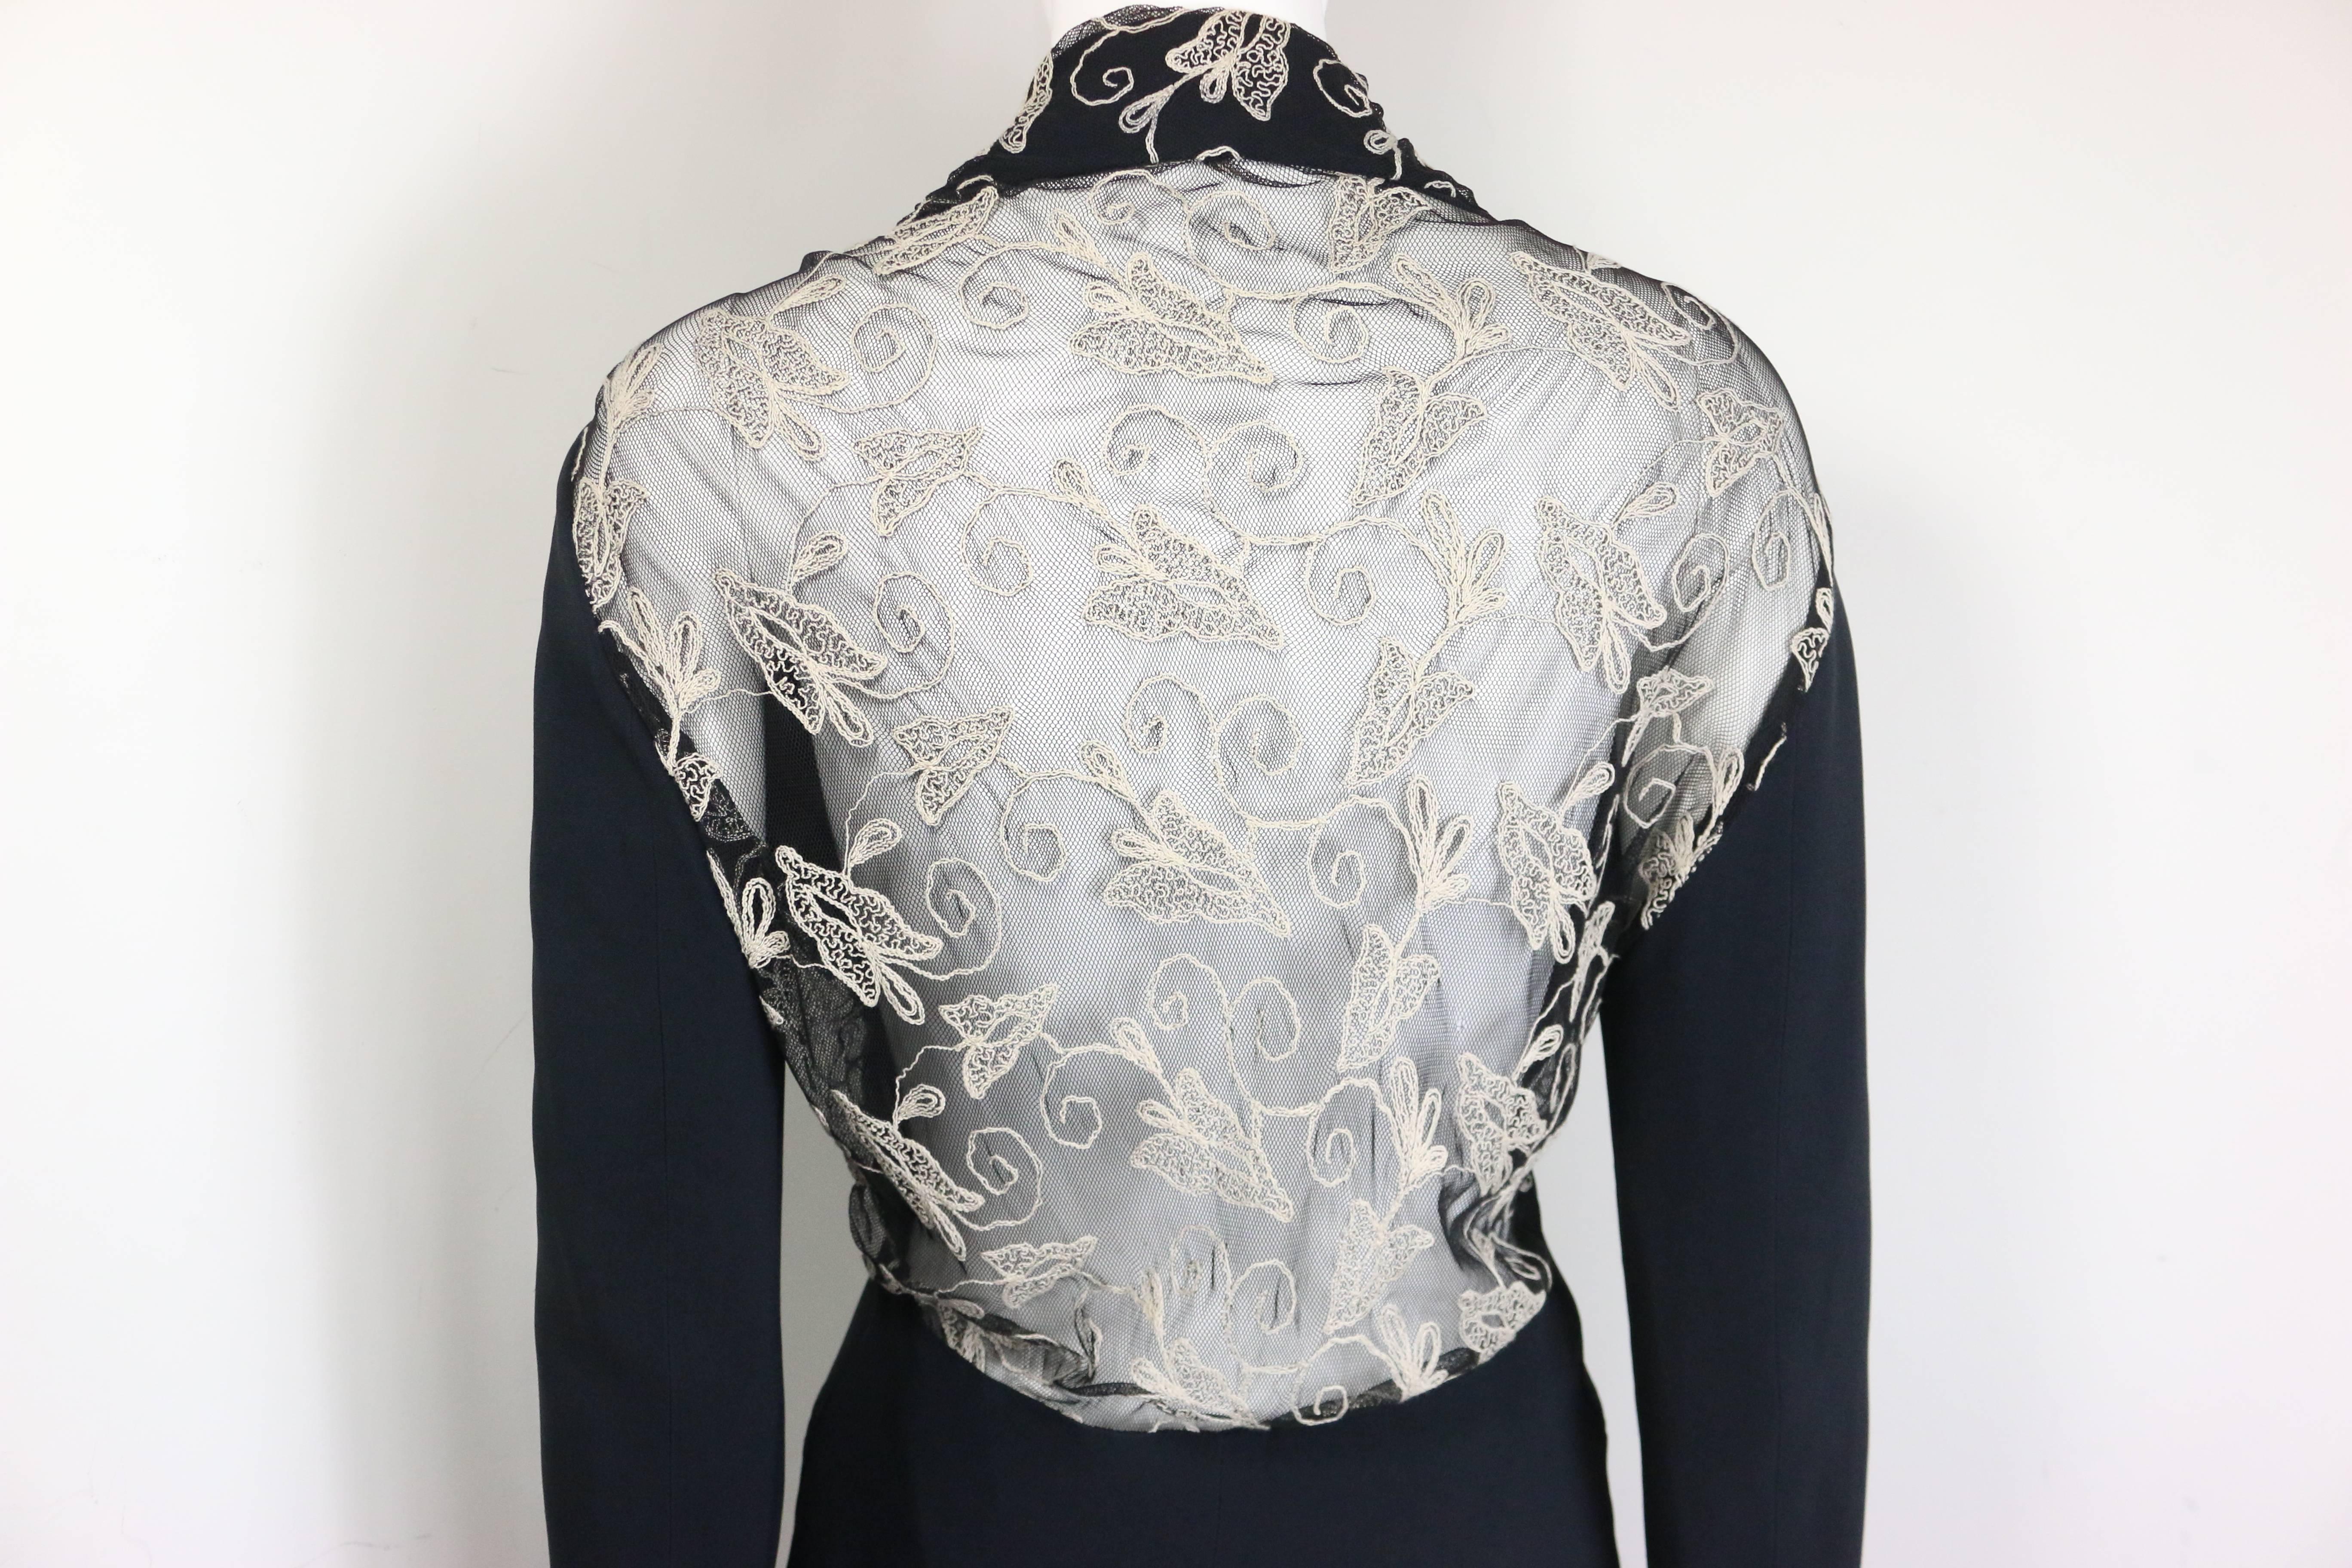 Women's Vintage 90s Batik Black Jacket with White Embroidered Lace Behind  For Sale